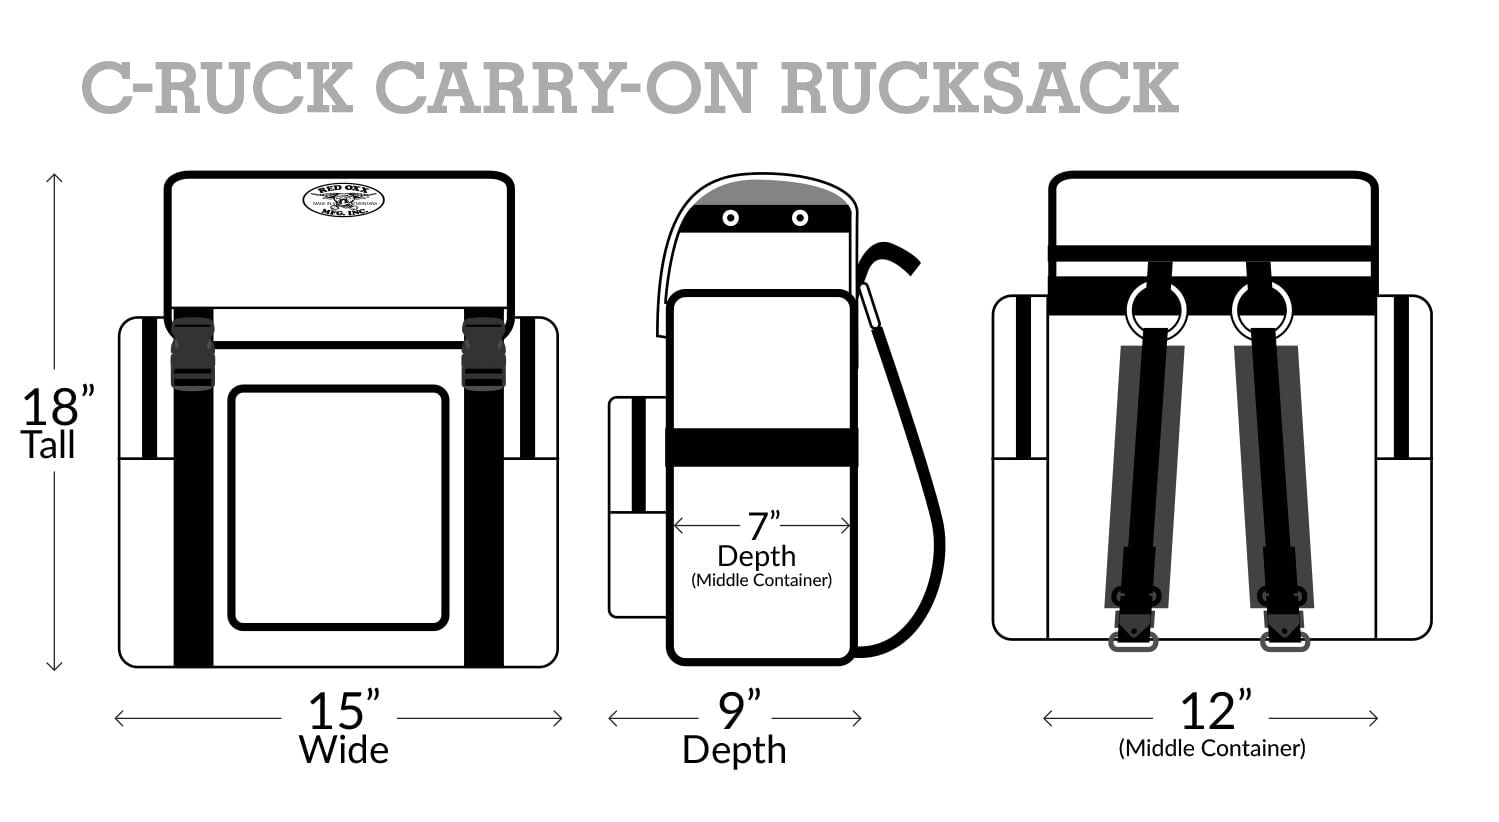 C Ruck Carry On Rucksack dimensions, 18 Inches Tall x 15 Inches Wide x 9 Inches Depth. 